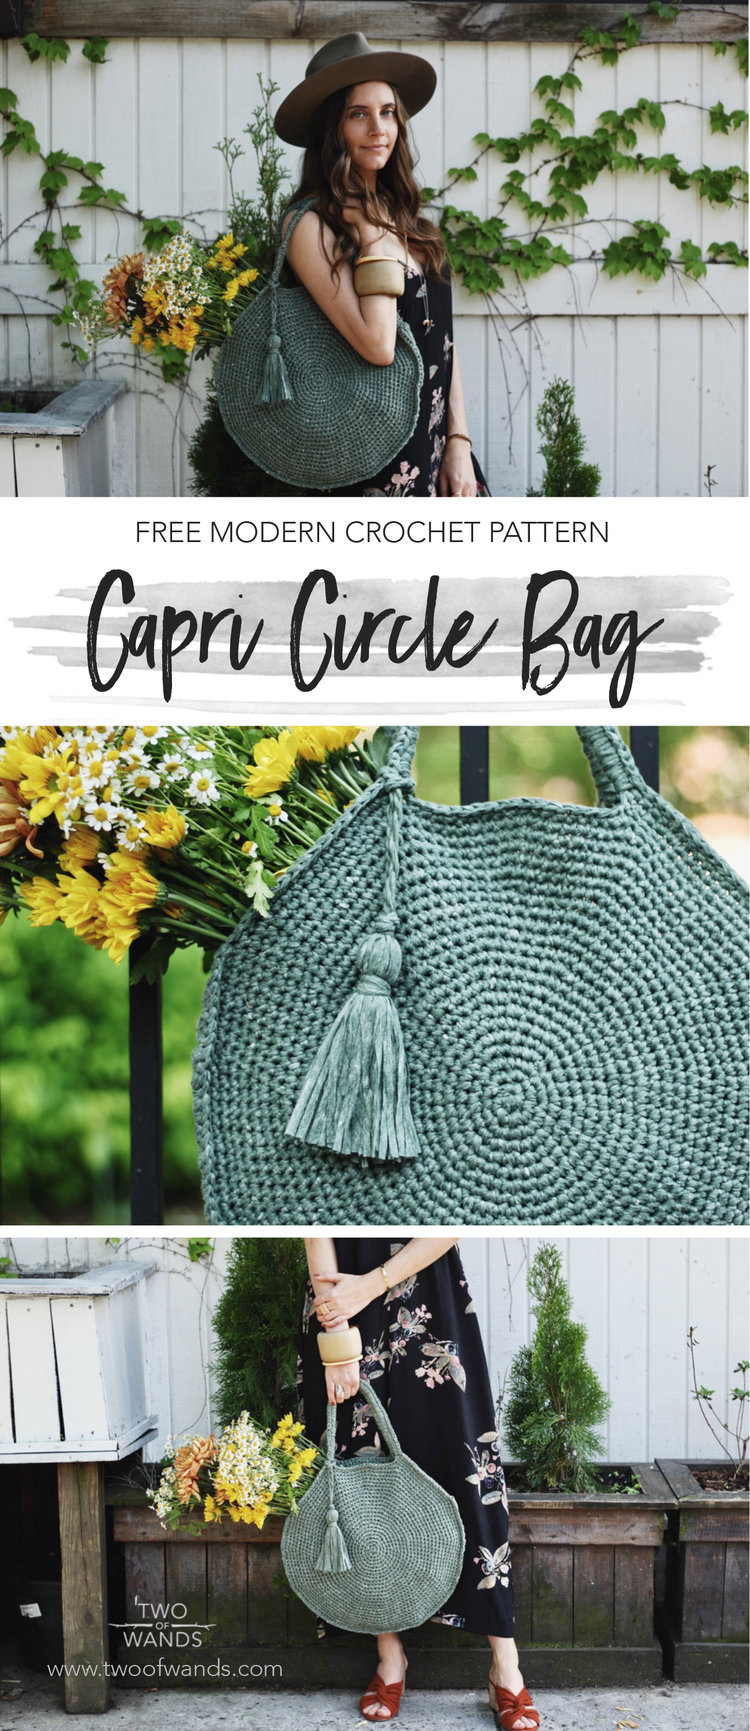 Capri+Circle+Bag+pattern+by+Two+of+Wands